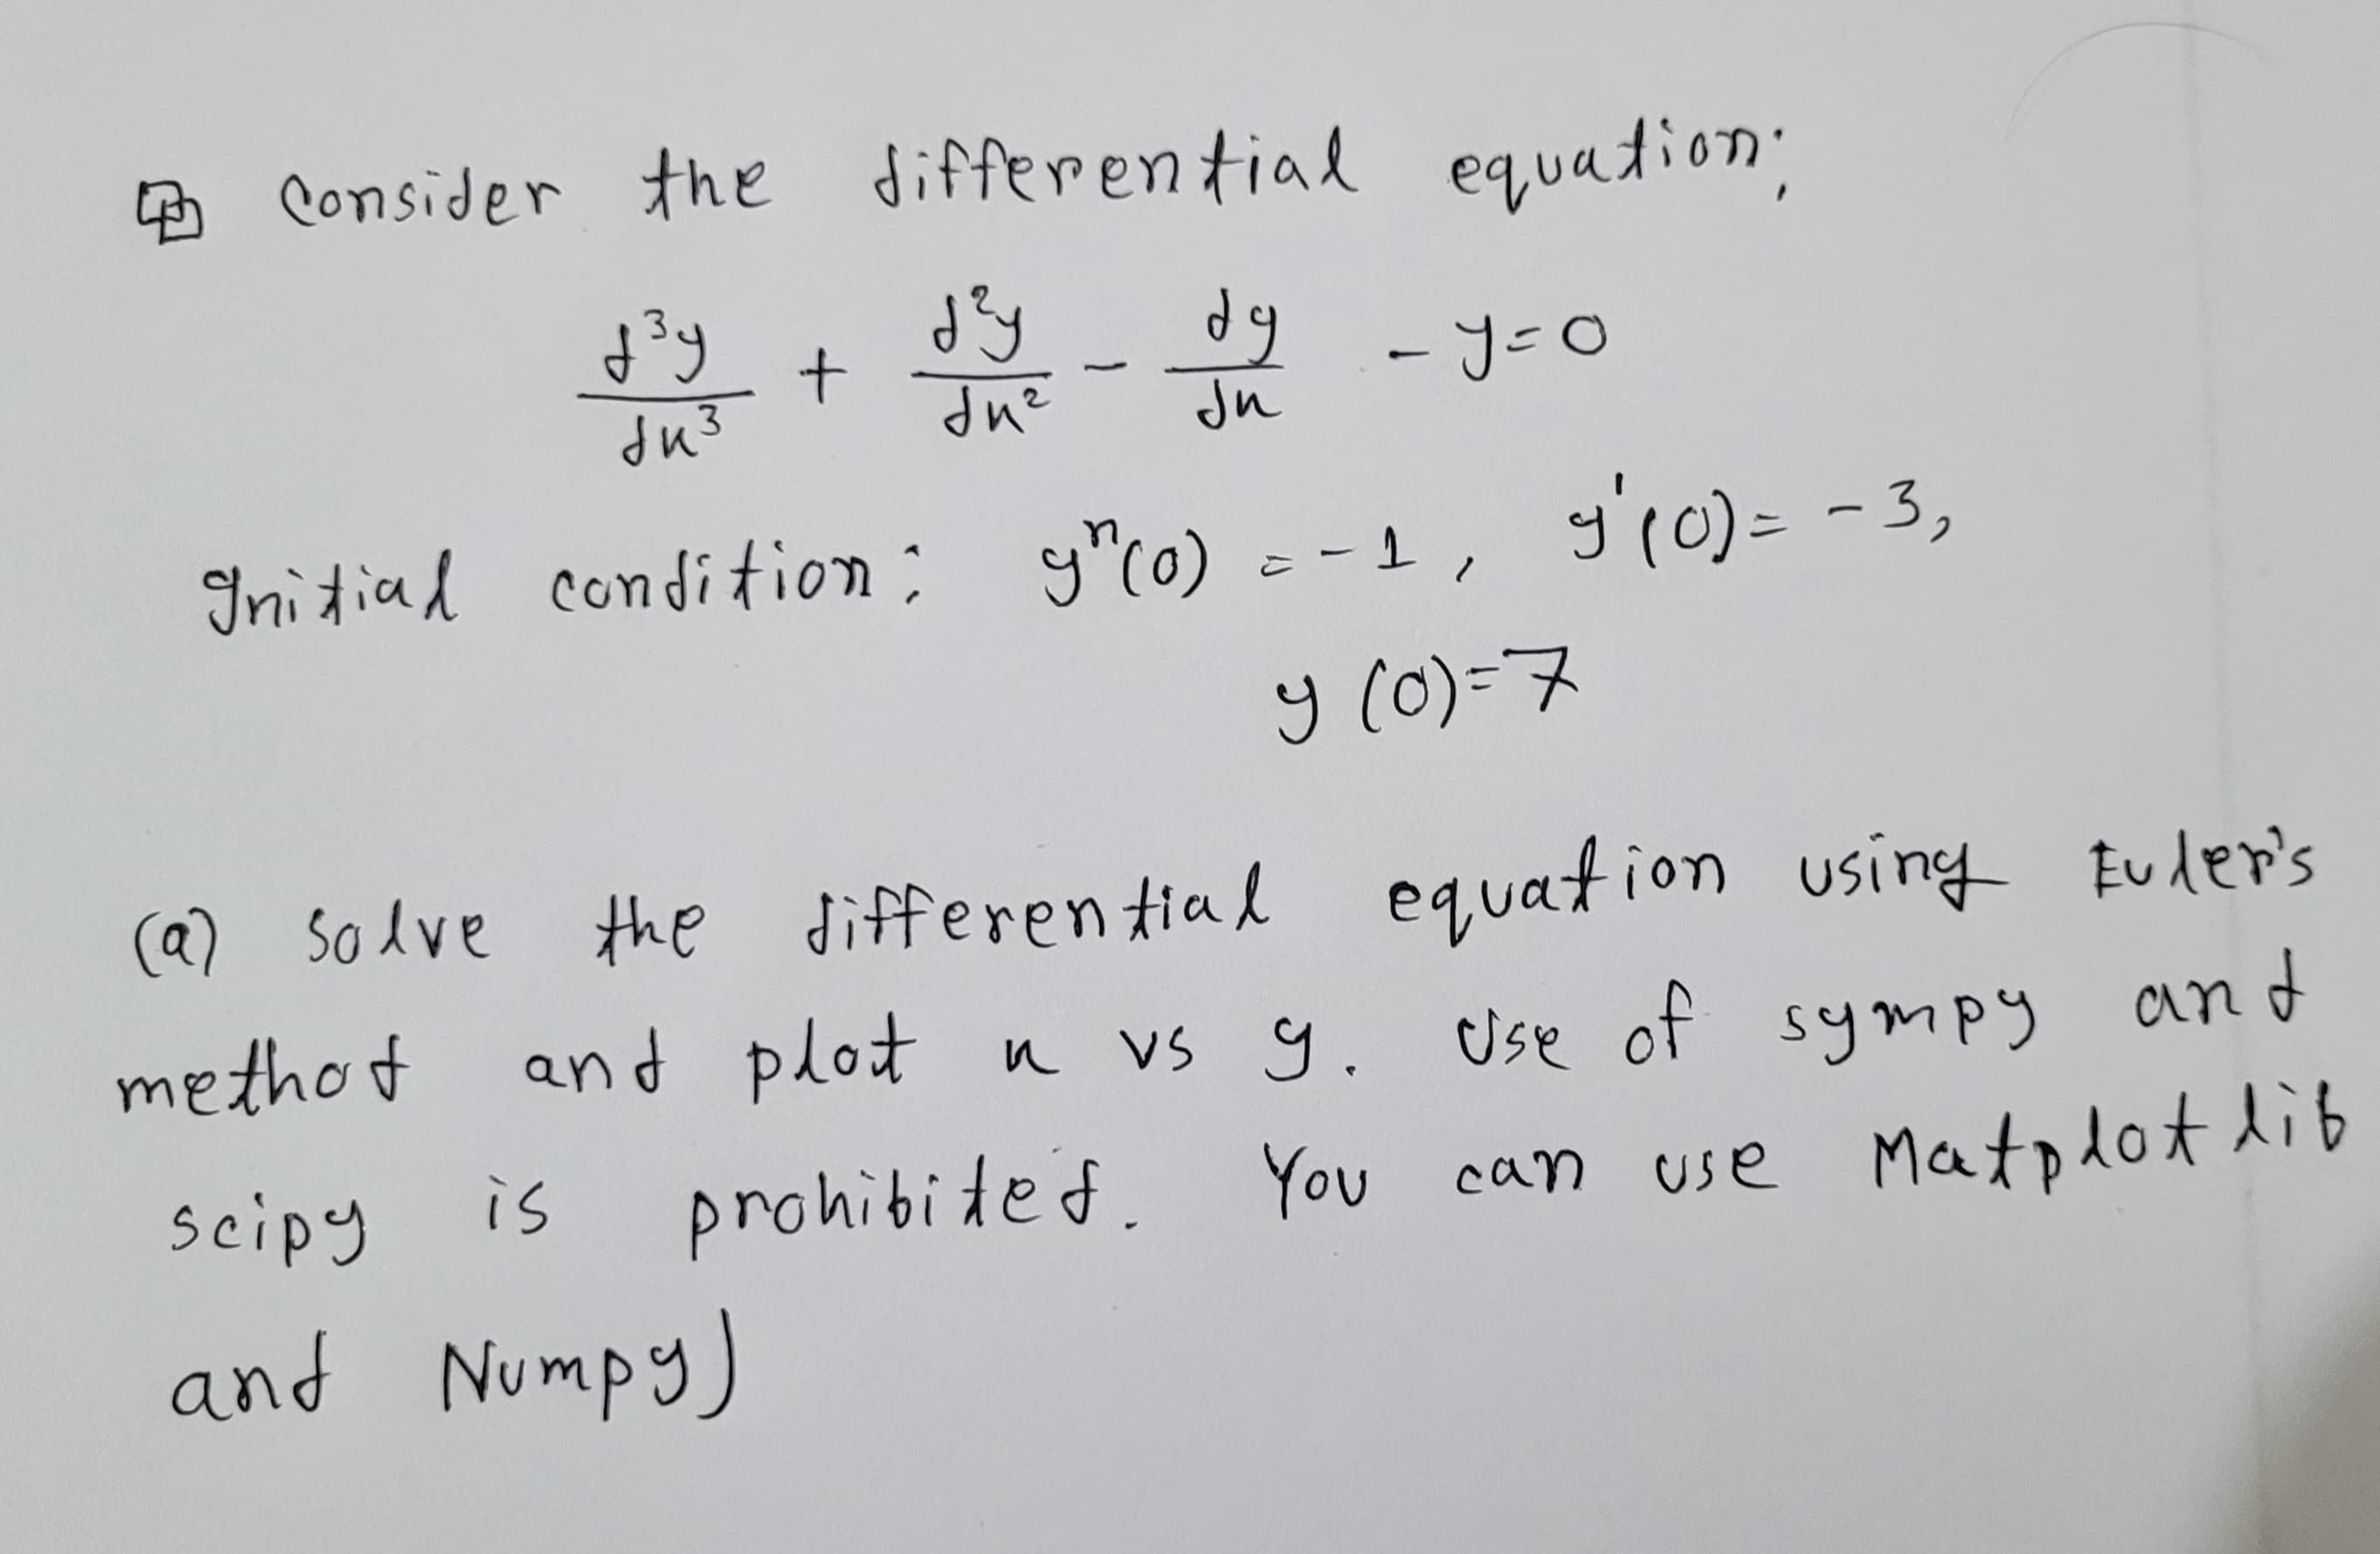 Consider the differential equation;
d²y + dy-dy - y=0
-
биз
du²
Ju
Initial condition: y" (0) =
y' (0) = -3₂
-1,
y (0)=7
scipy
and Numpy)
(a) solve the differential equation using Euler's
methot and plot n vs 9. Use of sympy and
prohibited. You can use Matplot lib
is